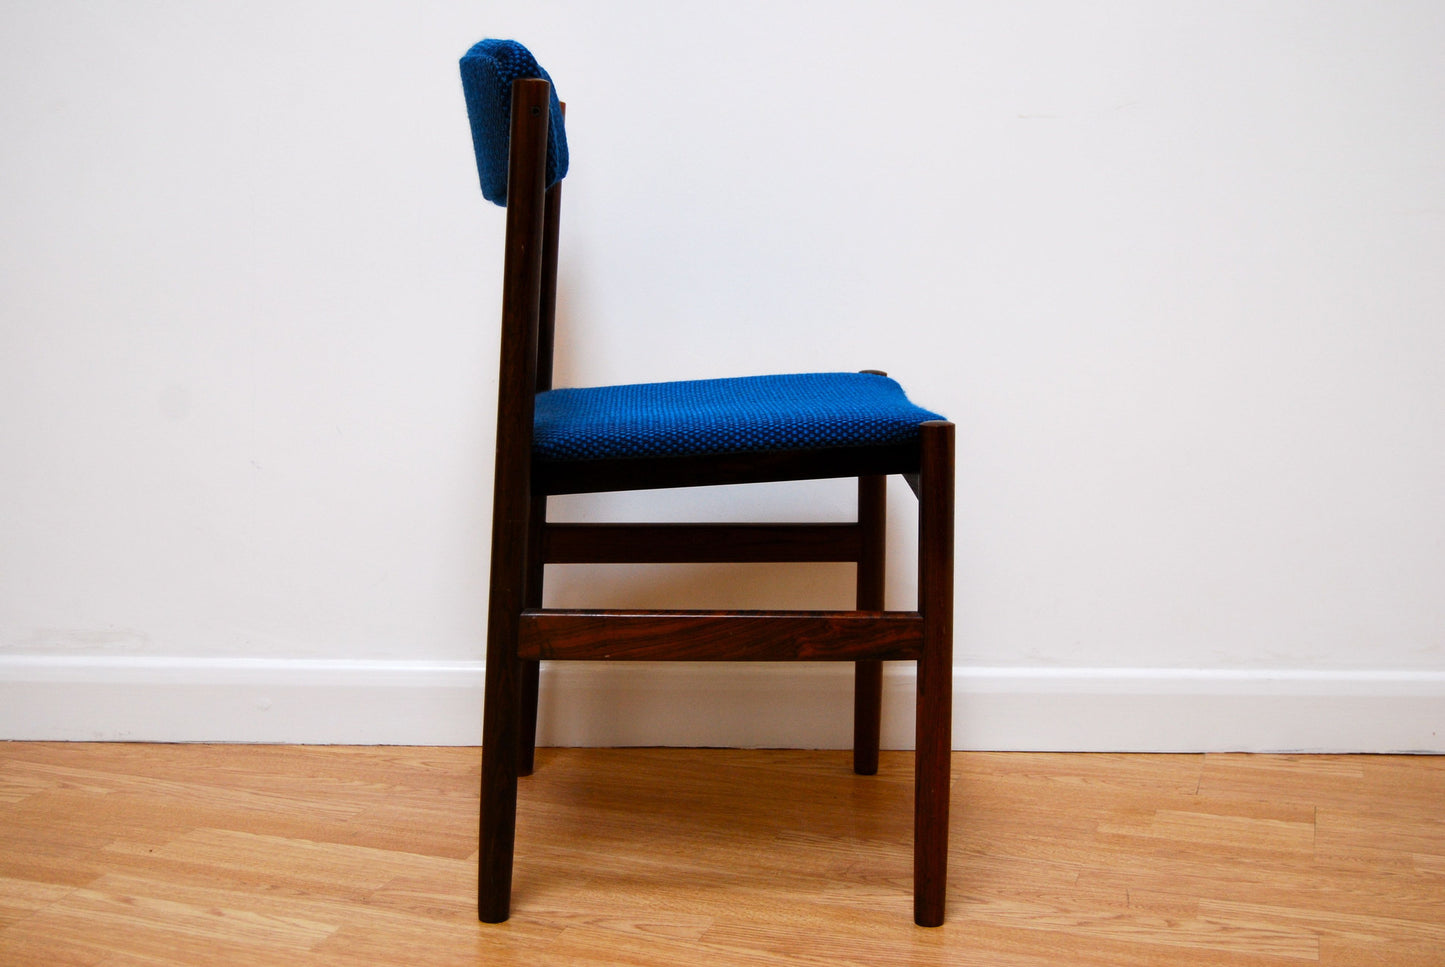 Set of four rosewood chairs with blue upholstery